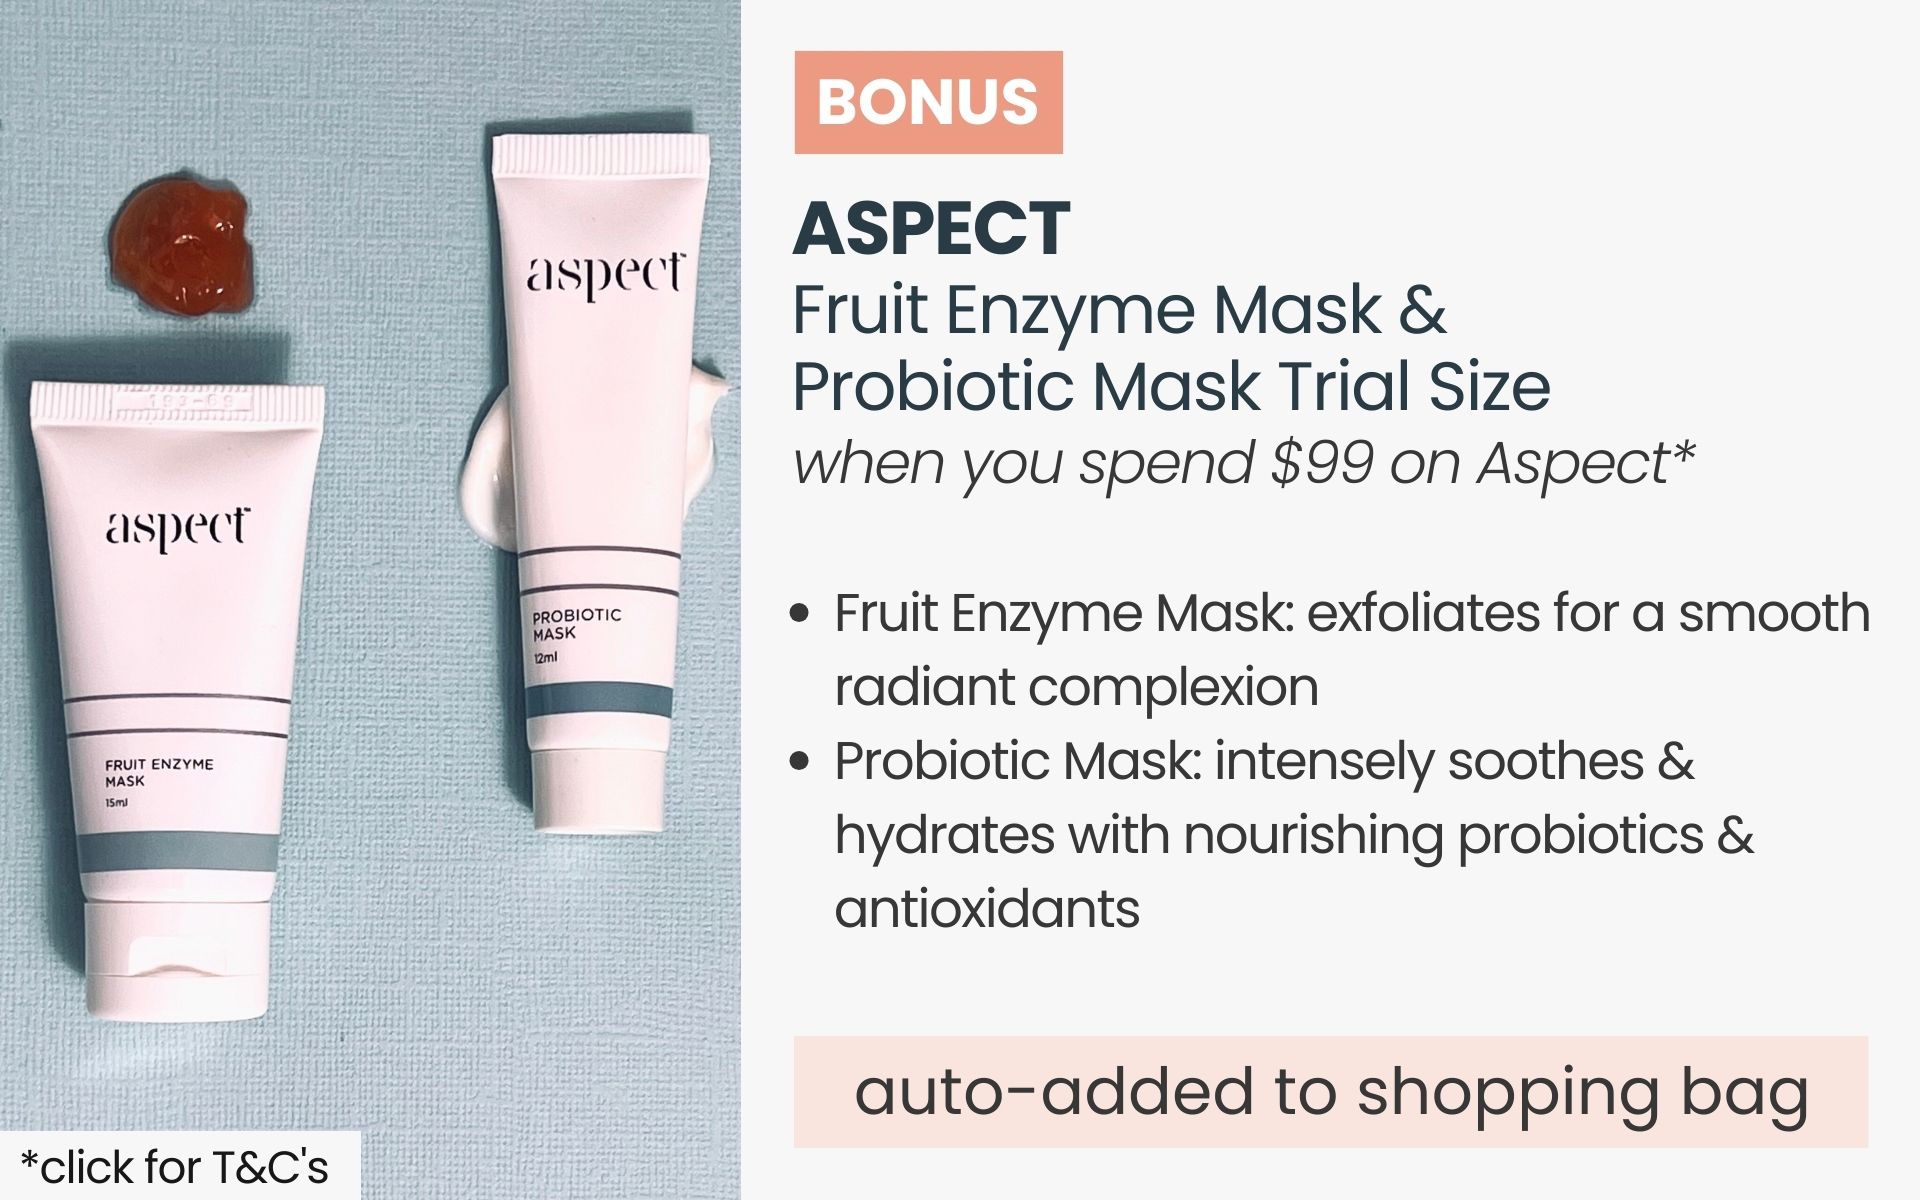 BONUS Aspect Fruit Enzyme Mask &  Probiotic Mask Trial Size. Automatically added to your shopping bag when you spend $99 on Aspect products.